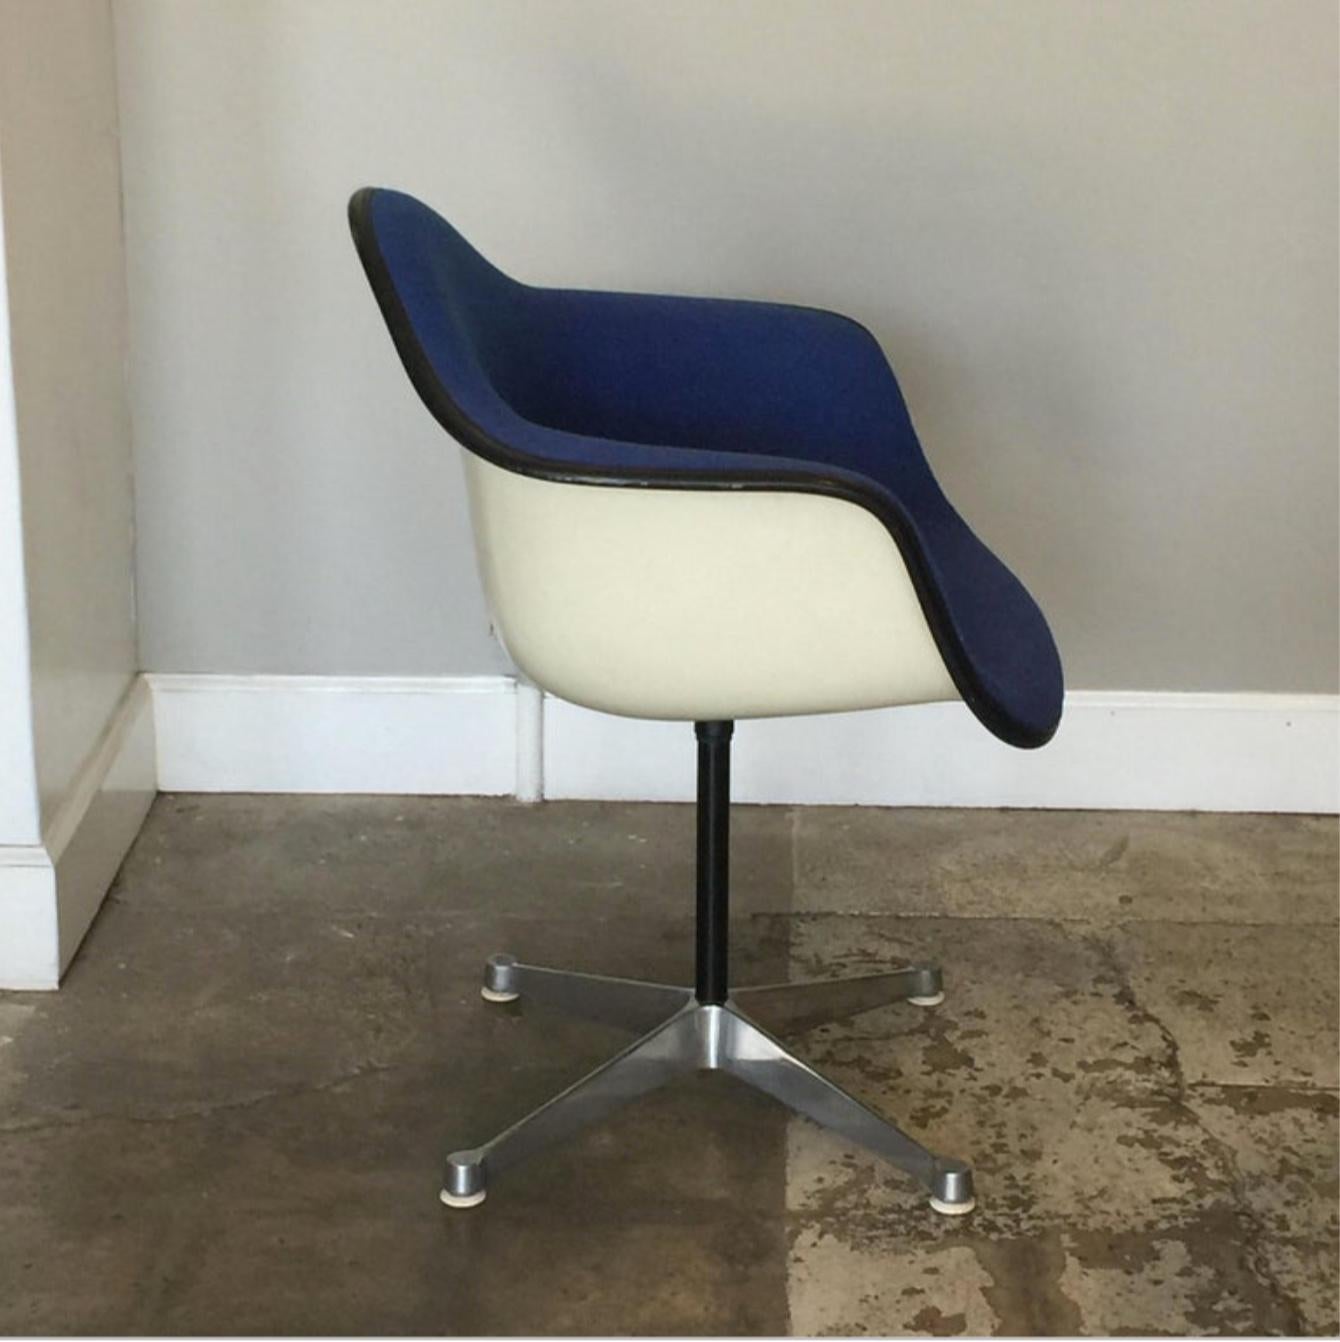 Impeccable molded swiveling armchair by Charles and Ray Eames for Herman Miller.

Contractor base model.